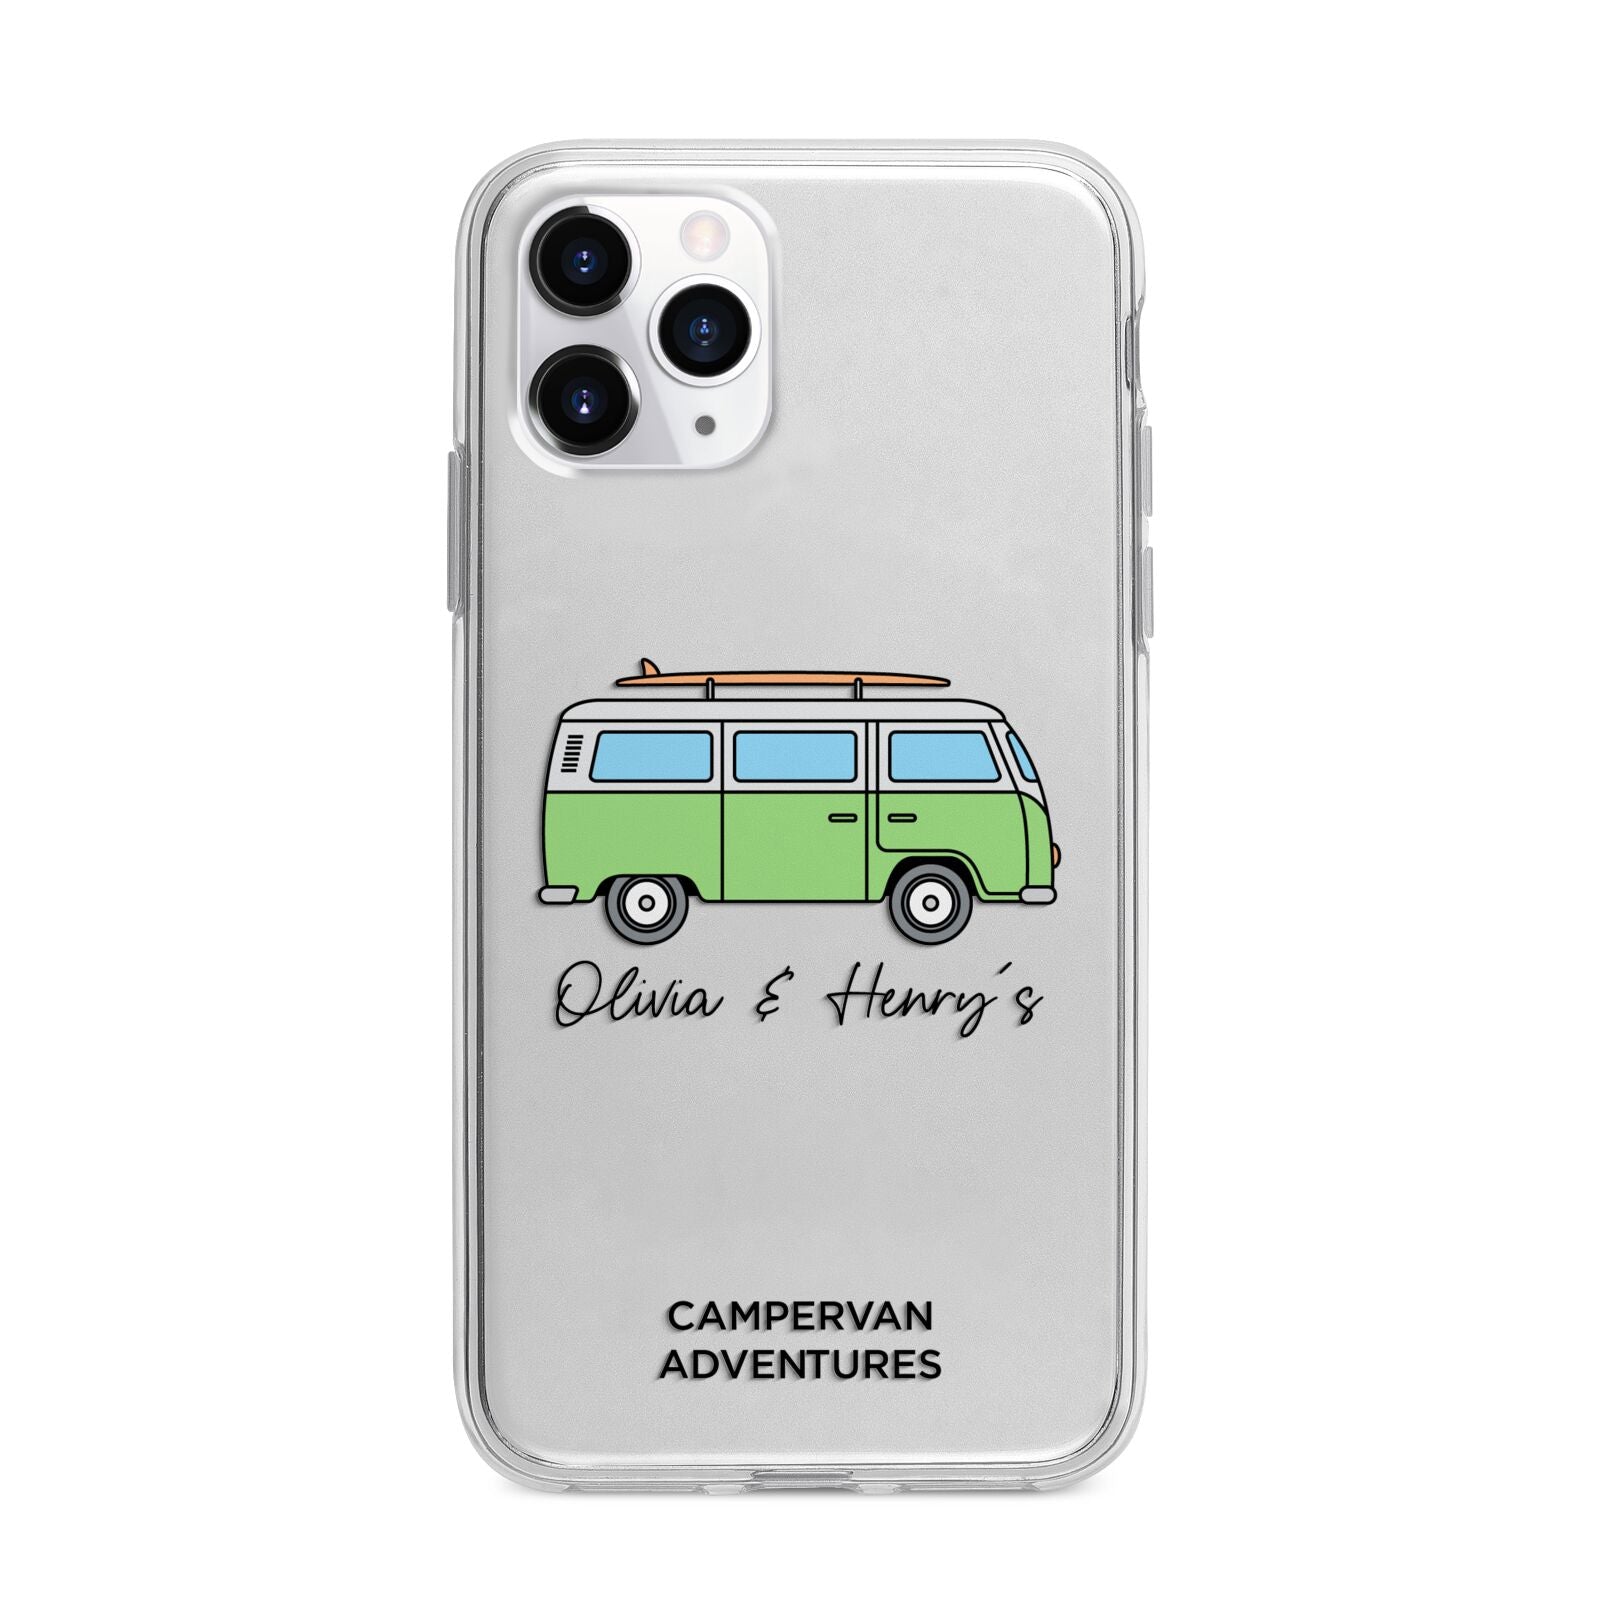 Green Bespoke Campervan Adventures Apple iPhone 11 Pro Max in Silver with Bumper Case